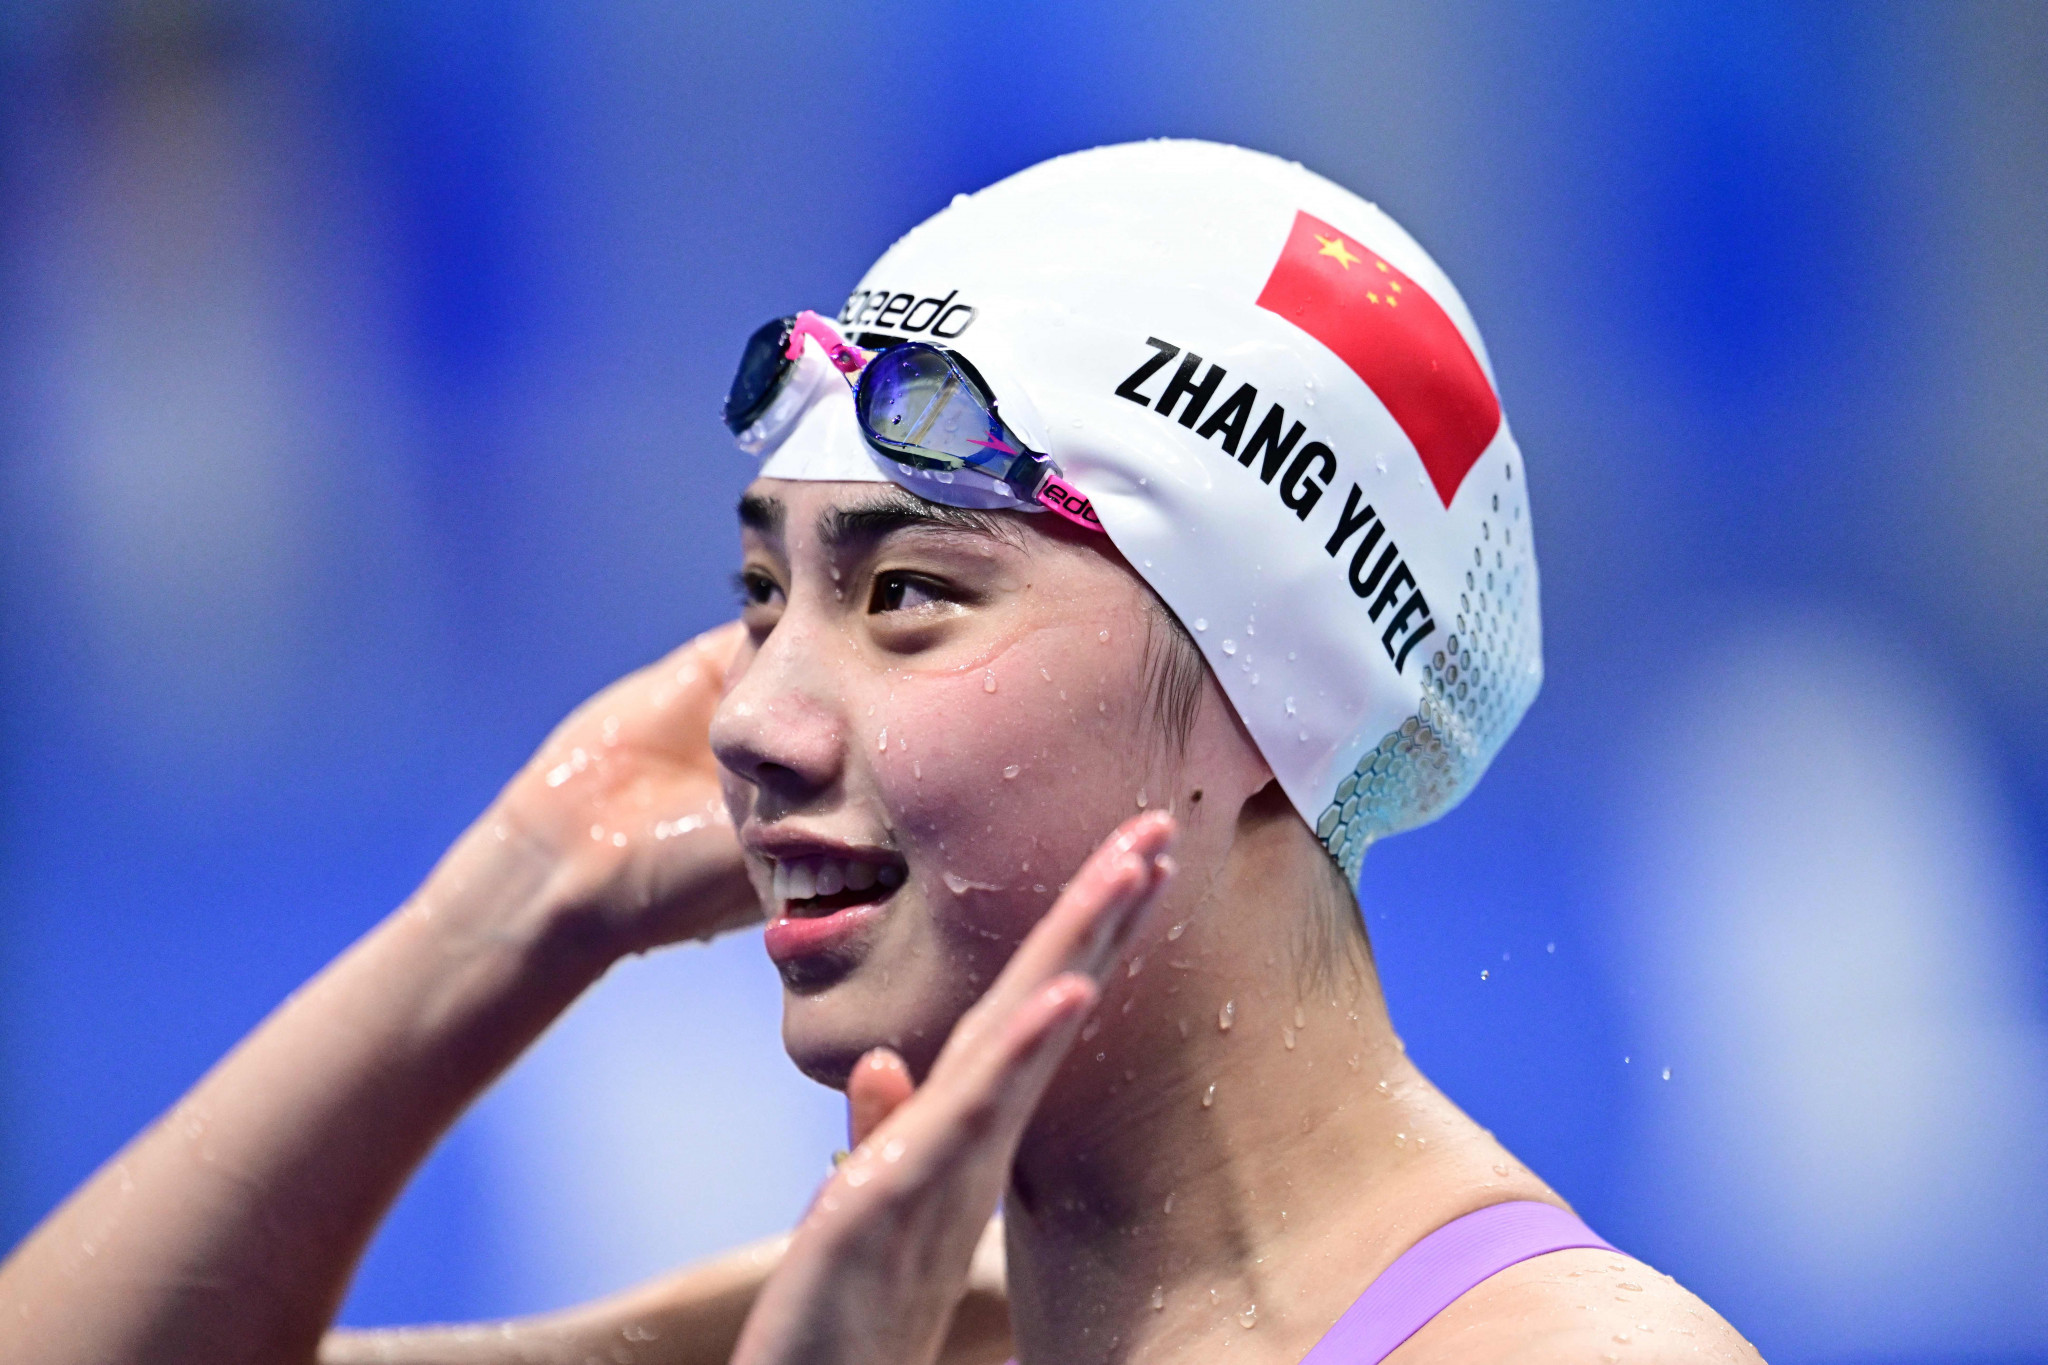 Zhang set a new women's 50m freestyle world record twice in the same day, including a gold medal performance of 24.26 ©Getty Images